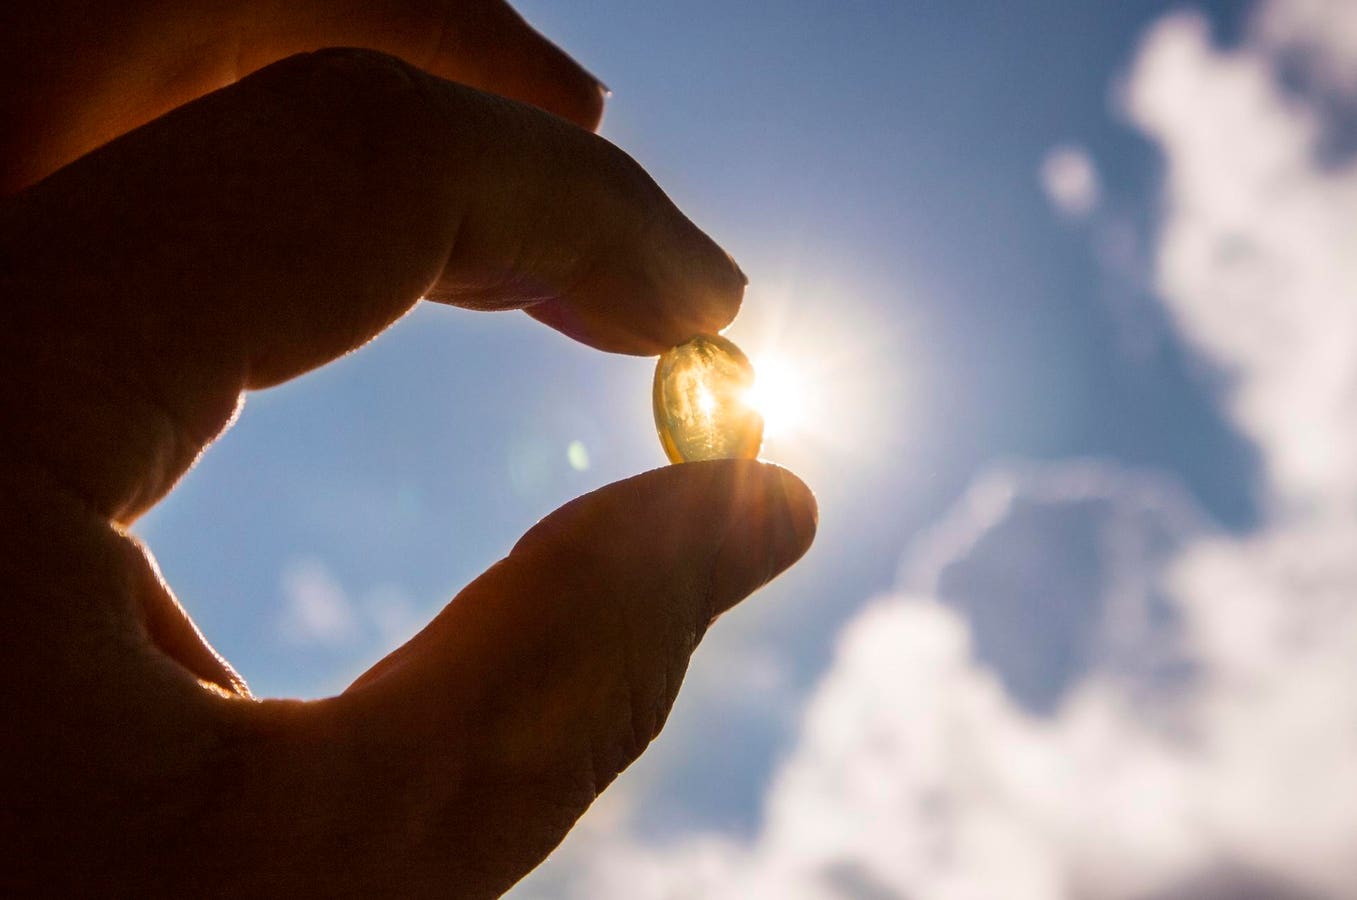 Can Vitamin D Improve Cancer Immunotherapy?